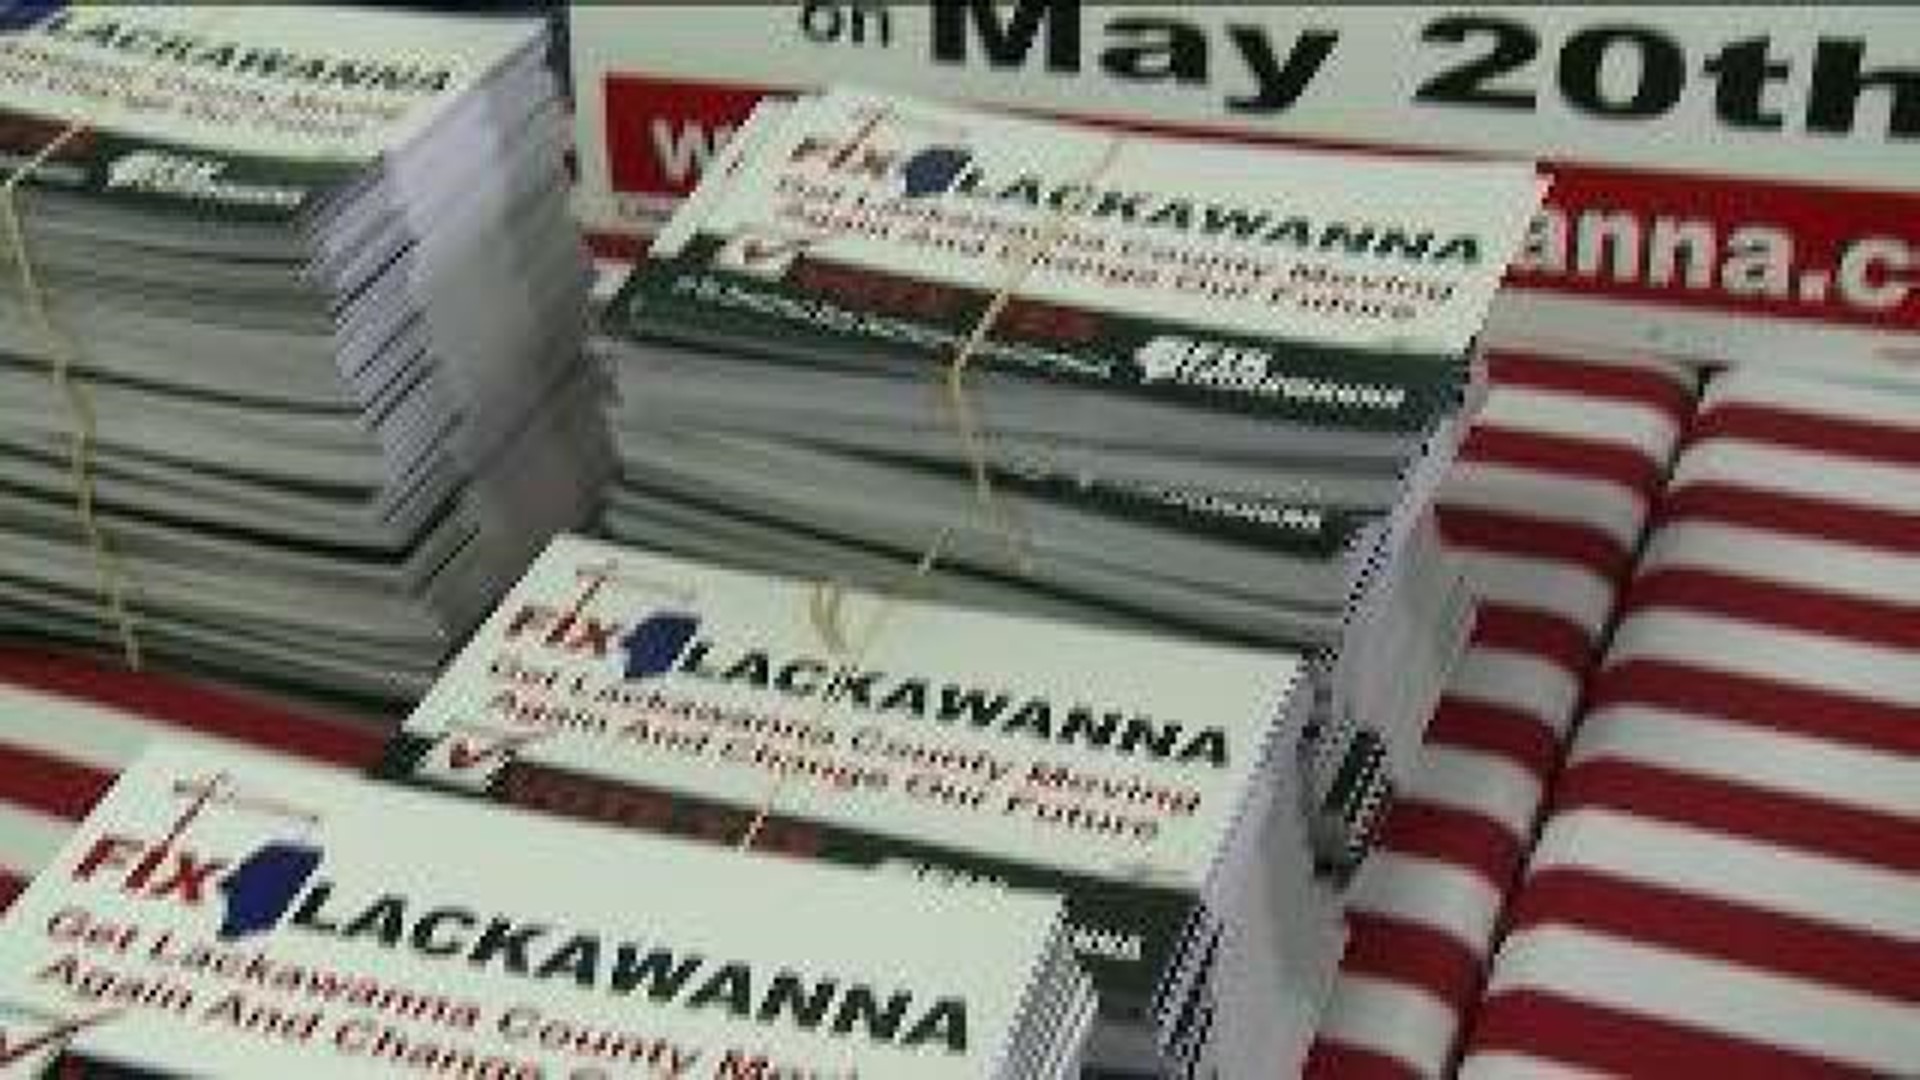 Voters In Lackawanna County Could Change Way County Is Governed